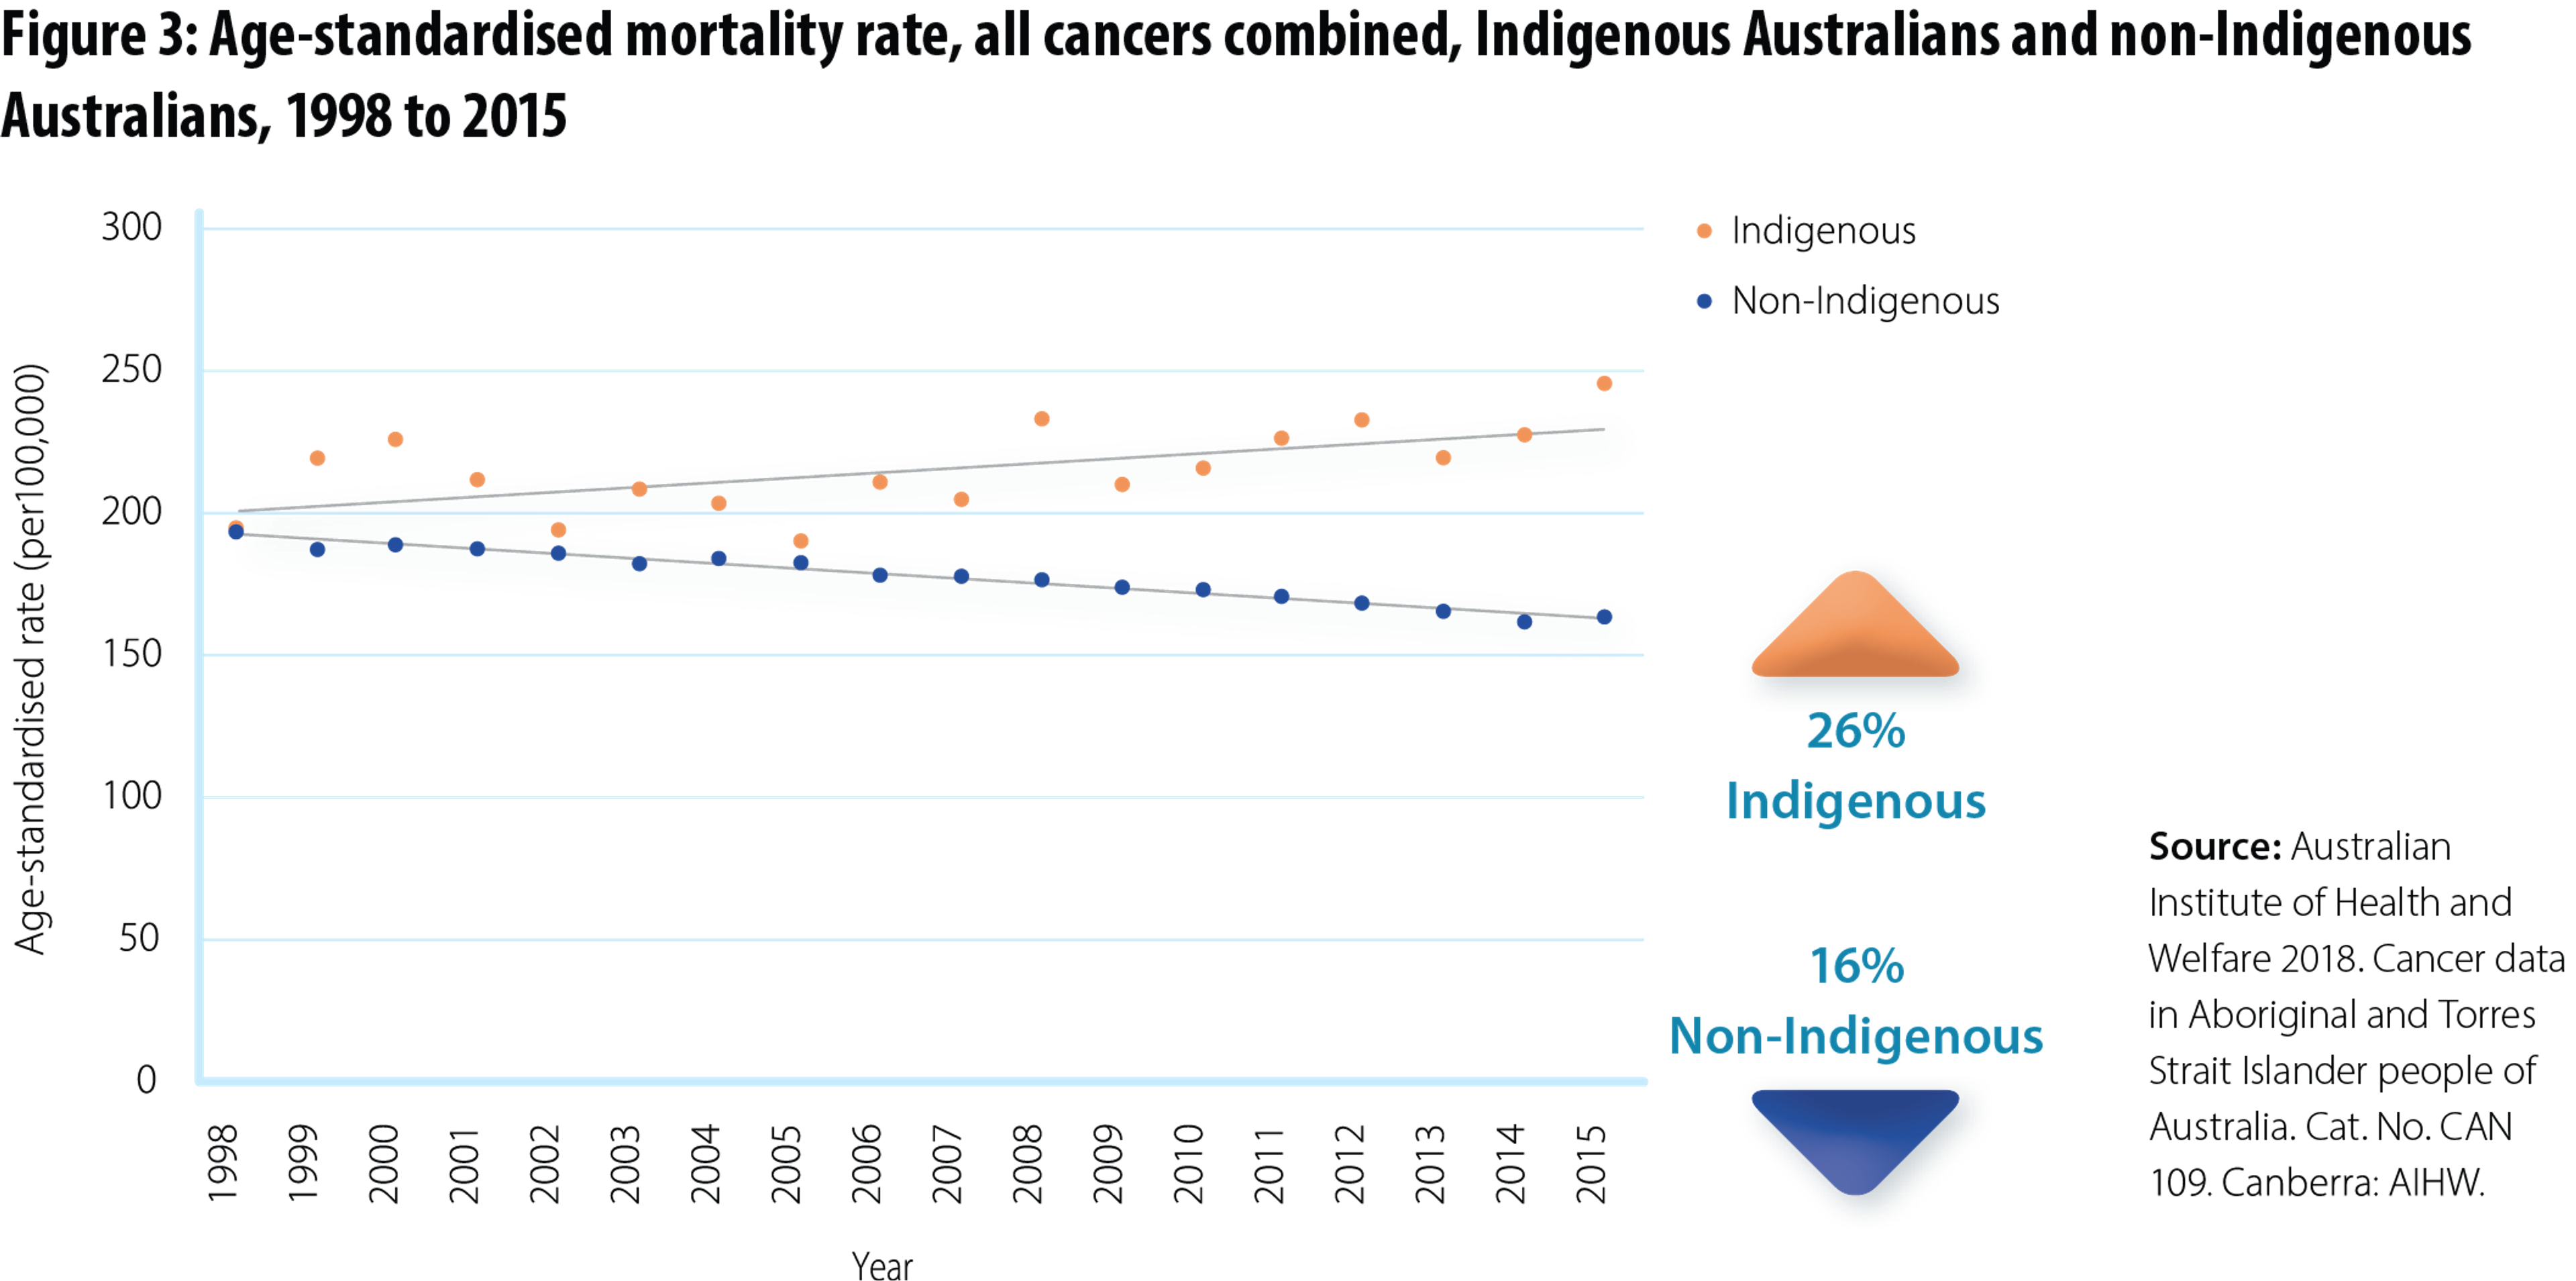 Figure 3: Scatter plot depicting the annual age-standardised mortality rates due to cancer for Indigenous and non-Indigenous Australians for the period 1998 to 2015. The age-standardised mortality rates are higher for the Indigenous population than for the non-Indigenous population over the entire period. A trend line shows the age-standardised mortality rate over this time period increasing for the Indigenous population by 26% and decreasing for the non-Indigenous population by 16%.